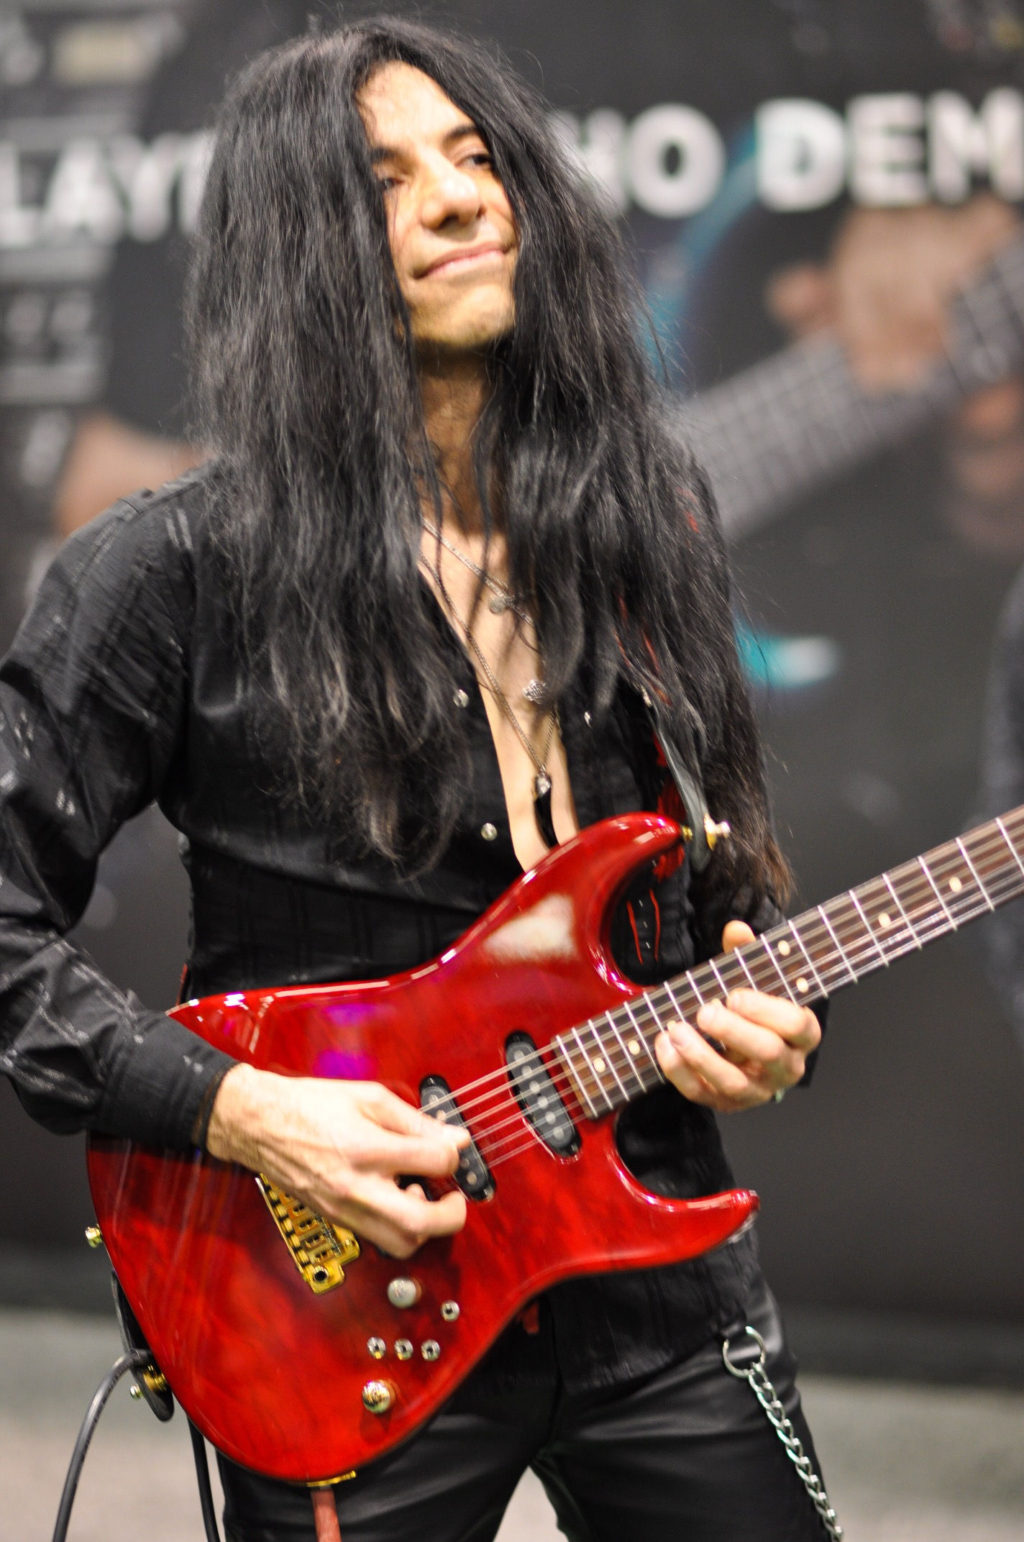 Mike Campese NAMM 2018, Gary Robinson Pic 2.